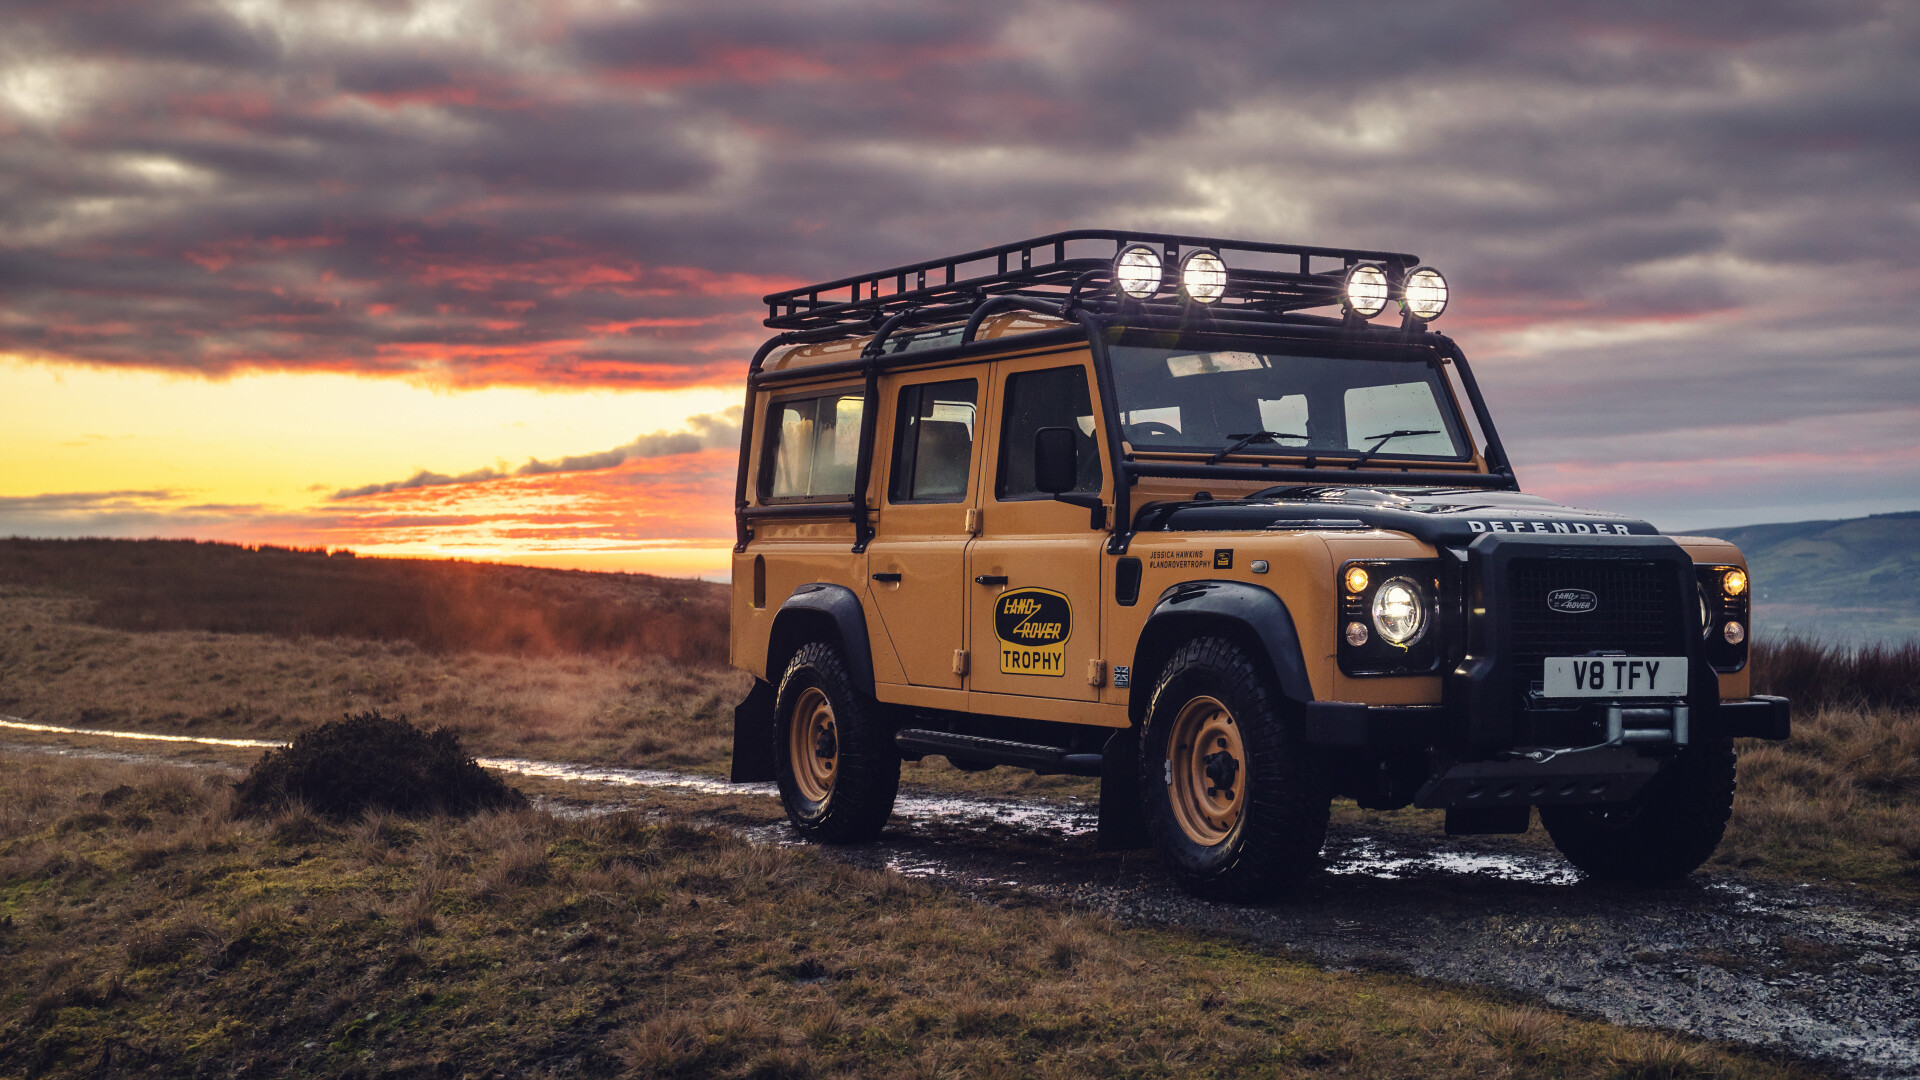 Land Rover: Defender, V8 Trophy 2021, Discovery 4 / LR4 was introduced in 2010. 1920x1080 Full HD Wallpaper.